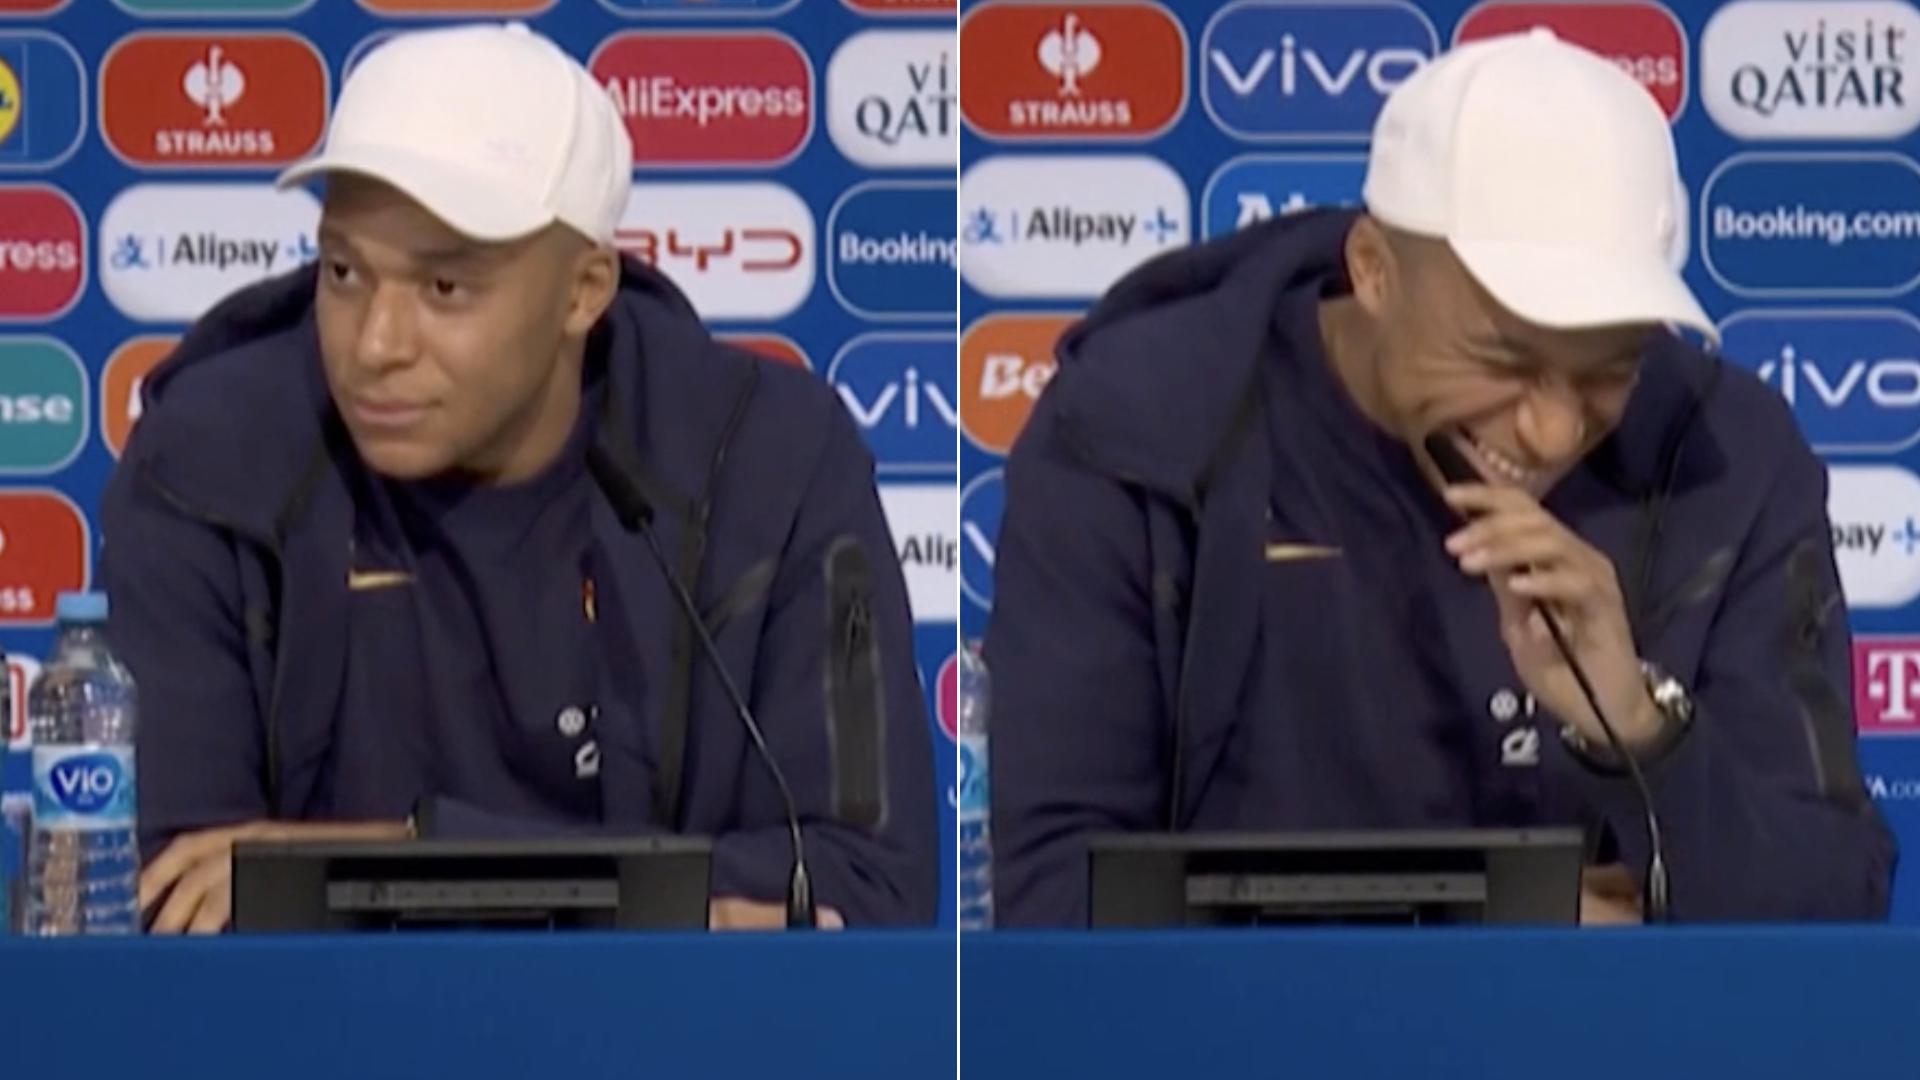 Mbappé burst into laughter at this question